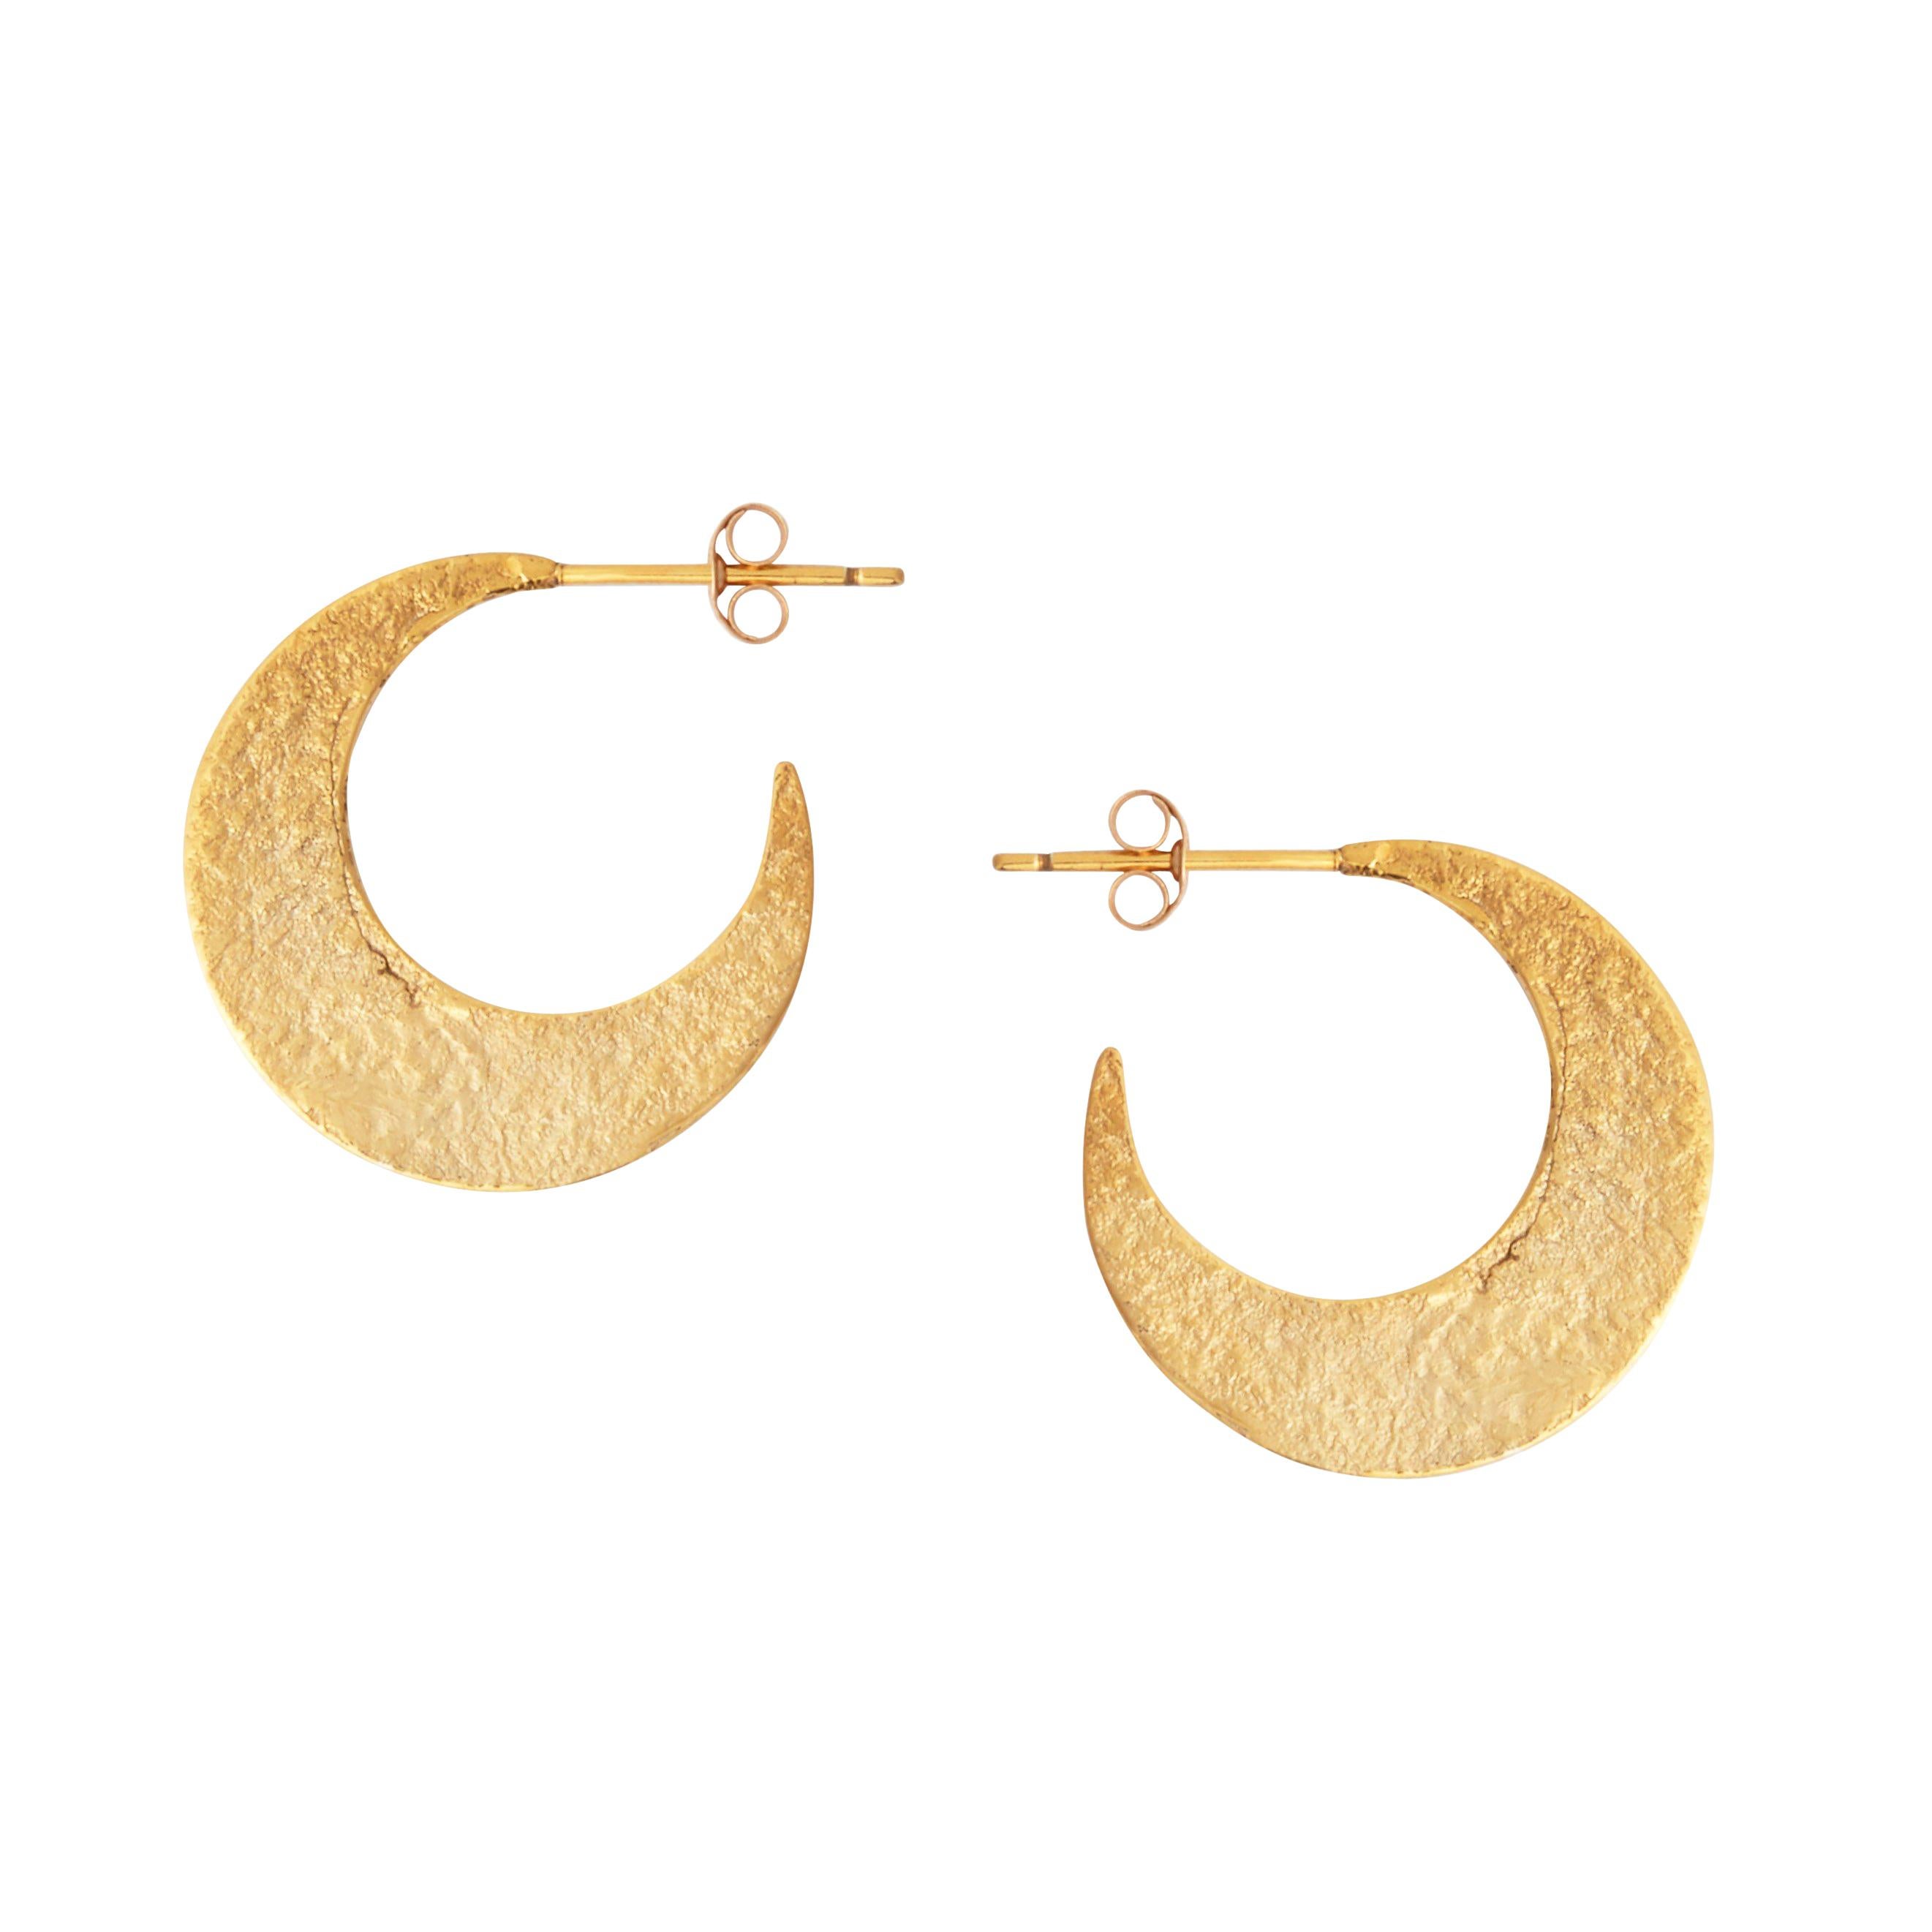 Textured Crescent Hoop Earrings in Gold by Allison Bryan